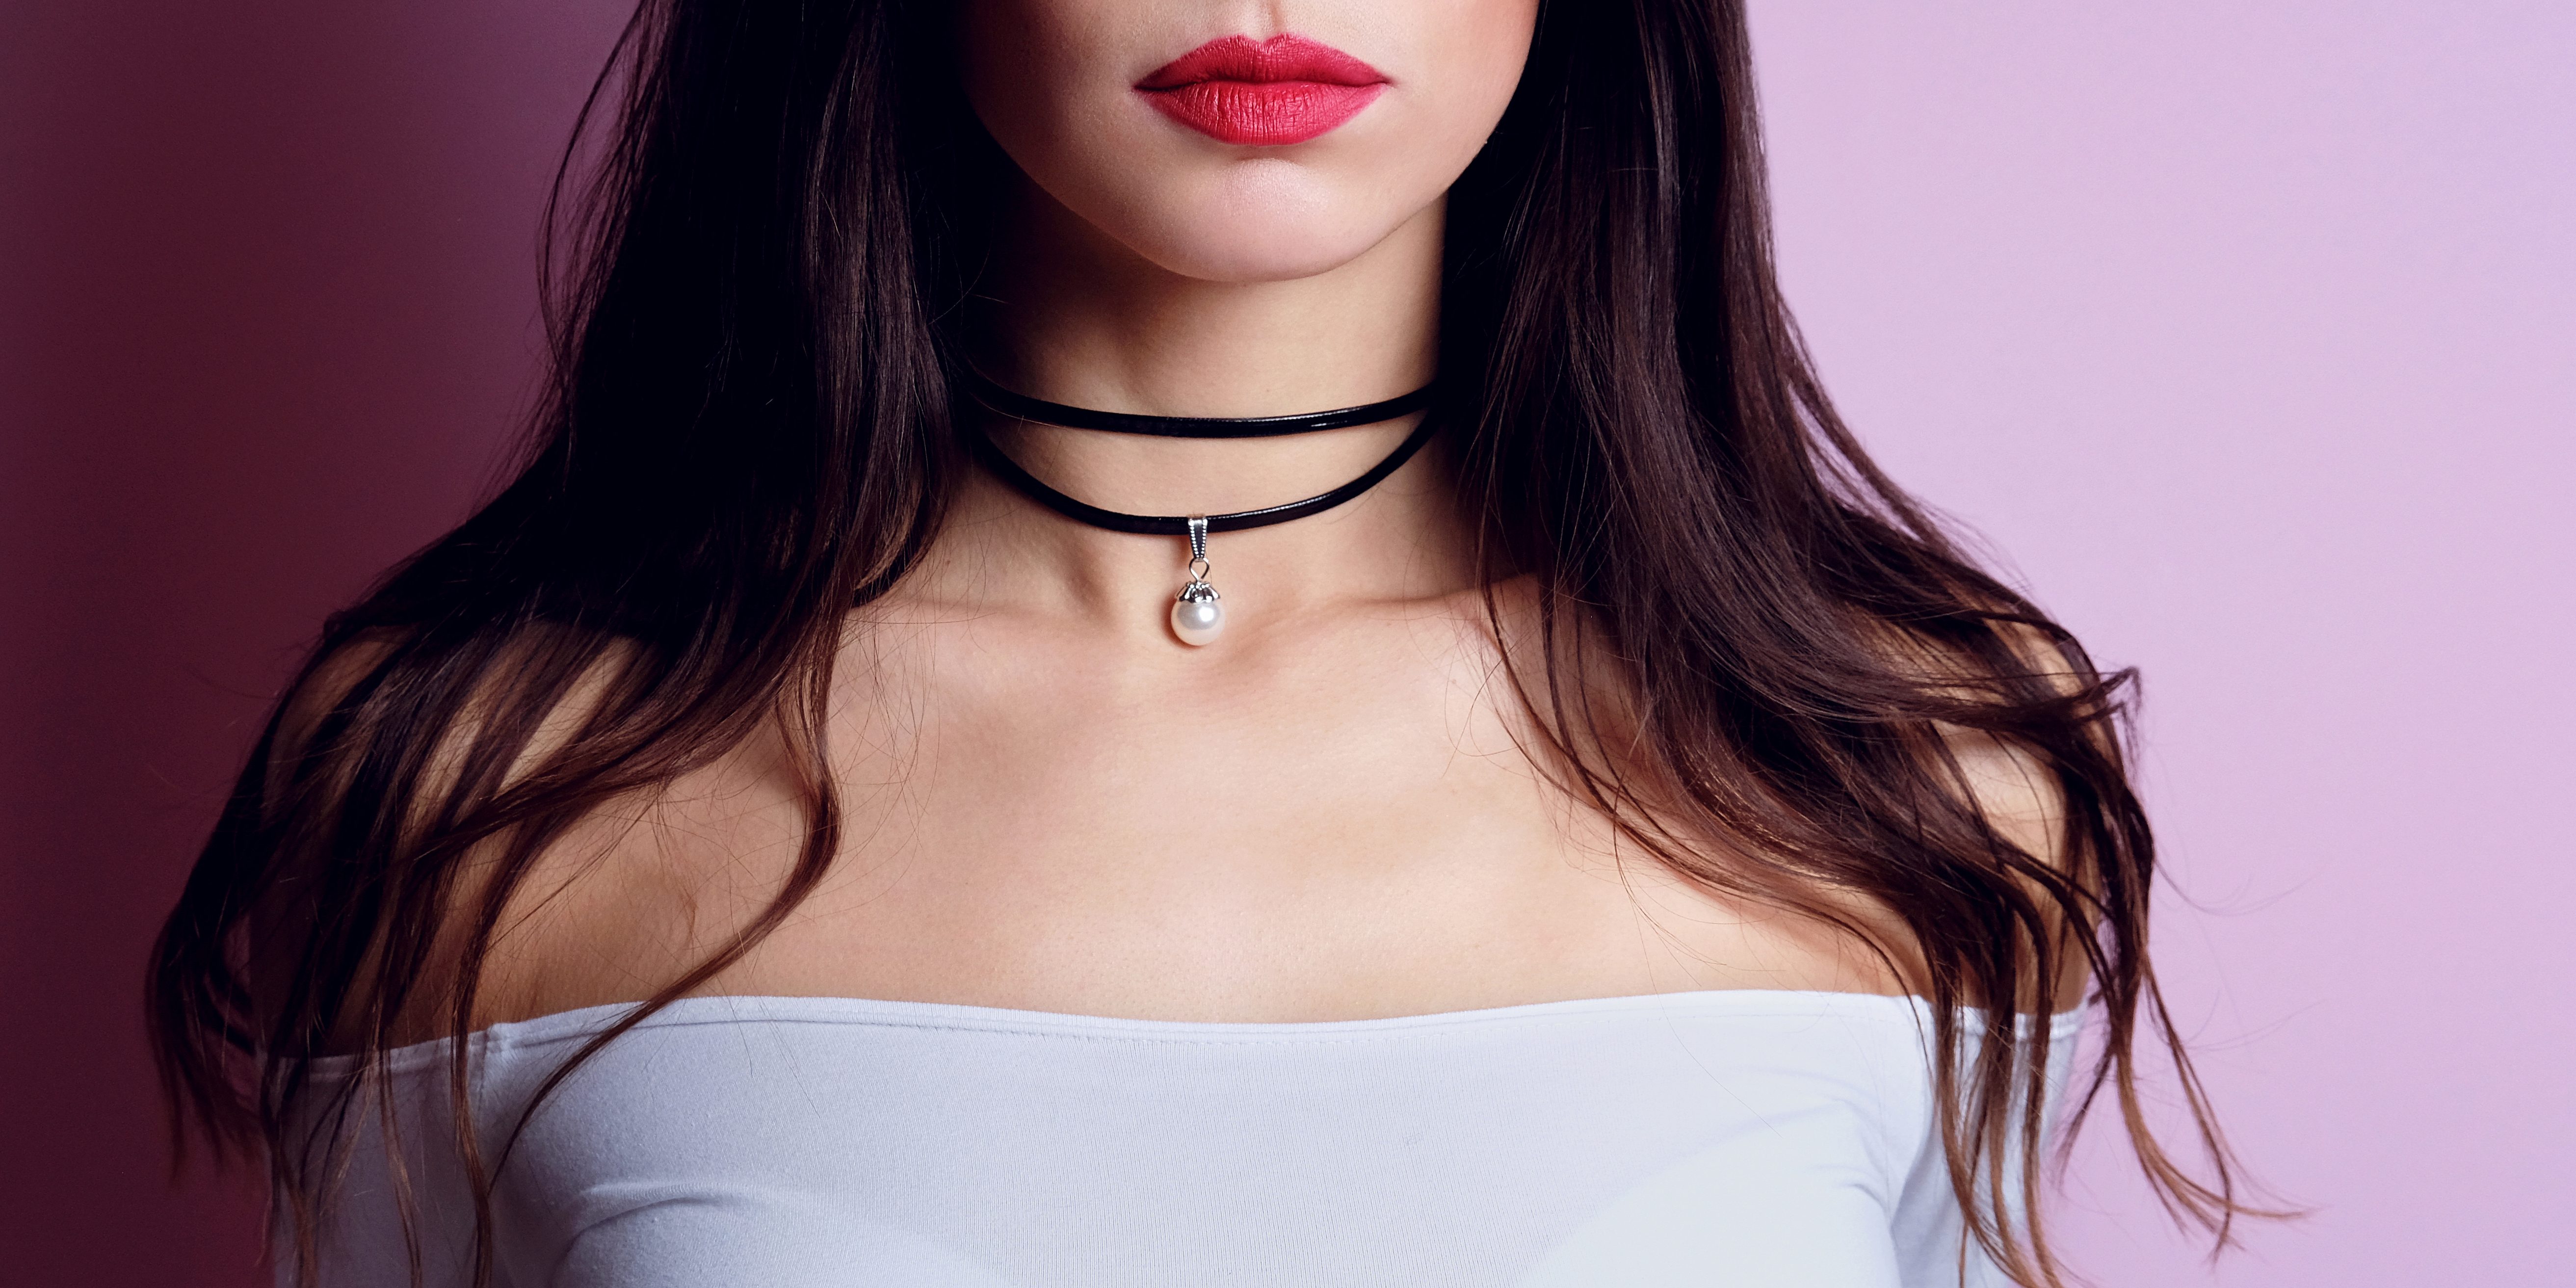 The Forgotten History Behind the Choker Necklace